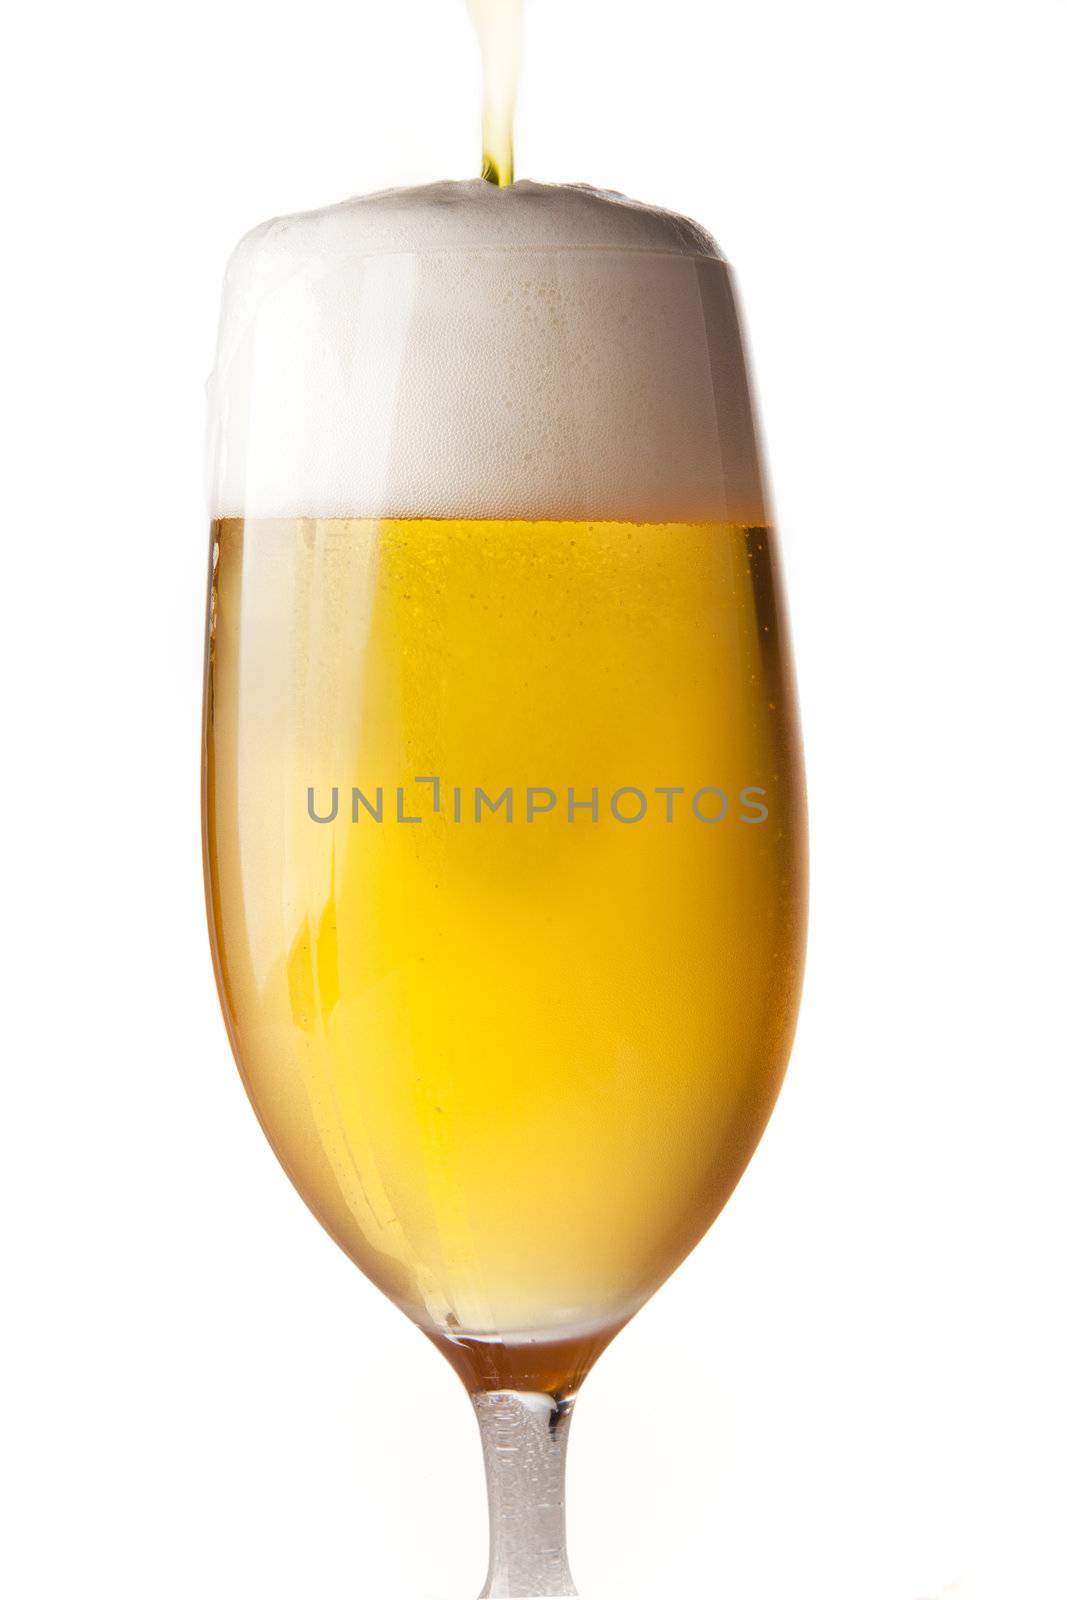 Beer being poured and just about to run over, isolated on white background.